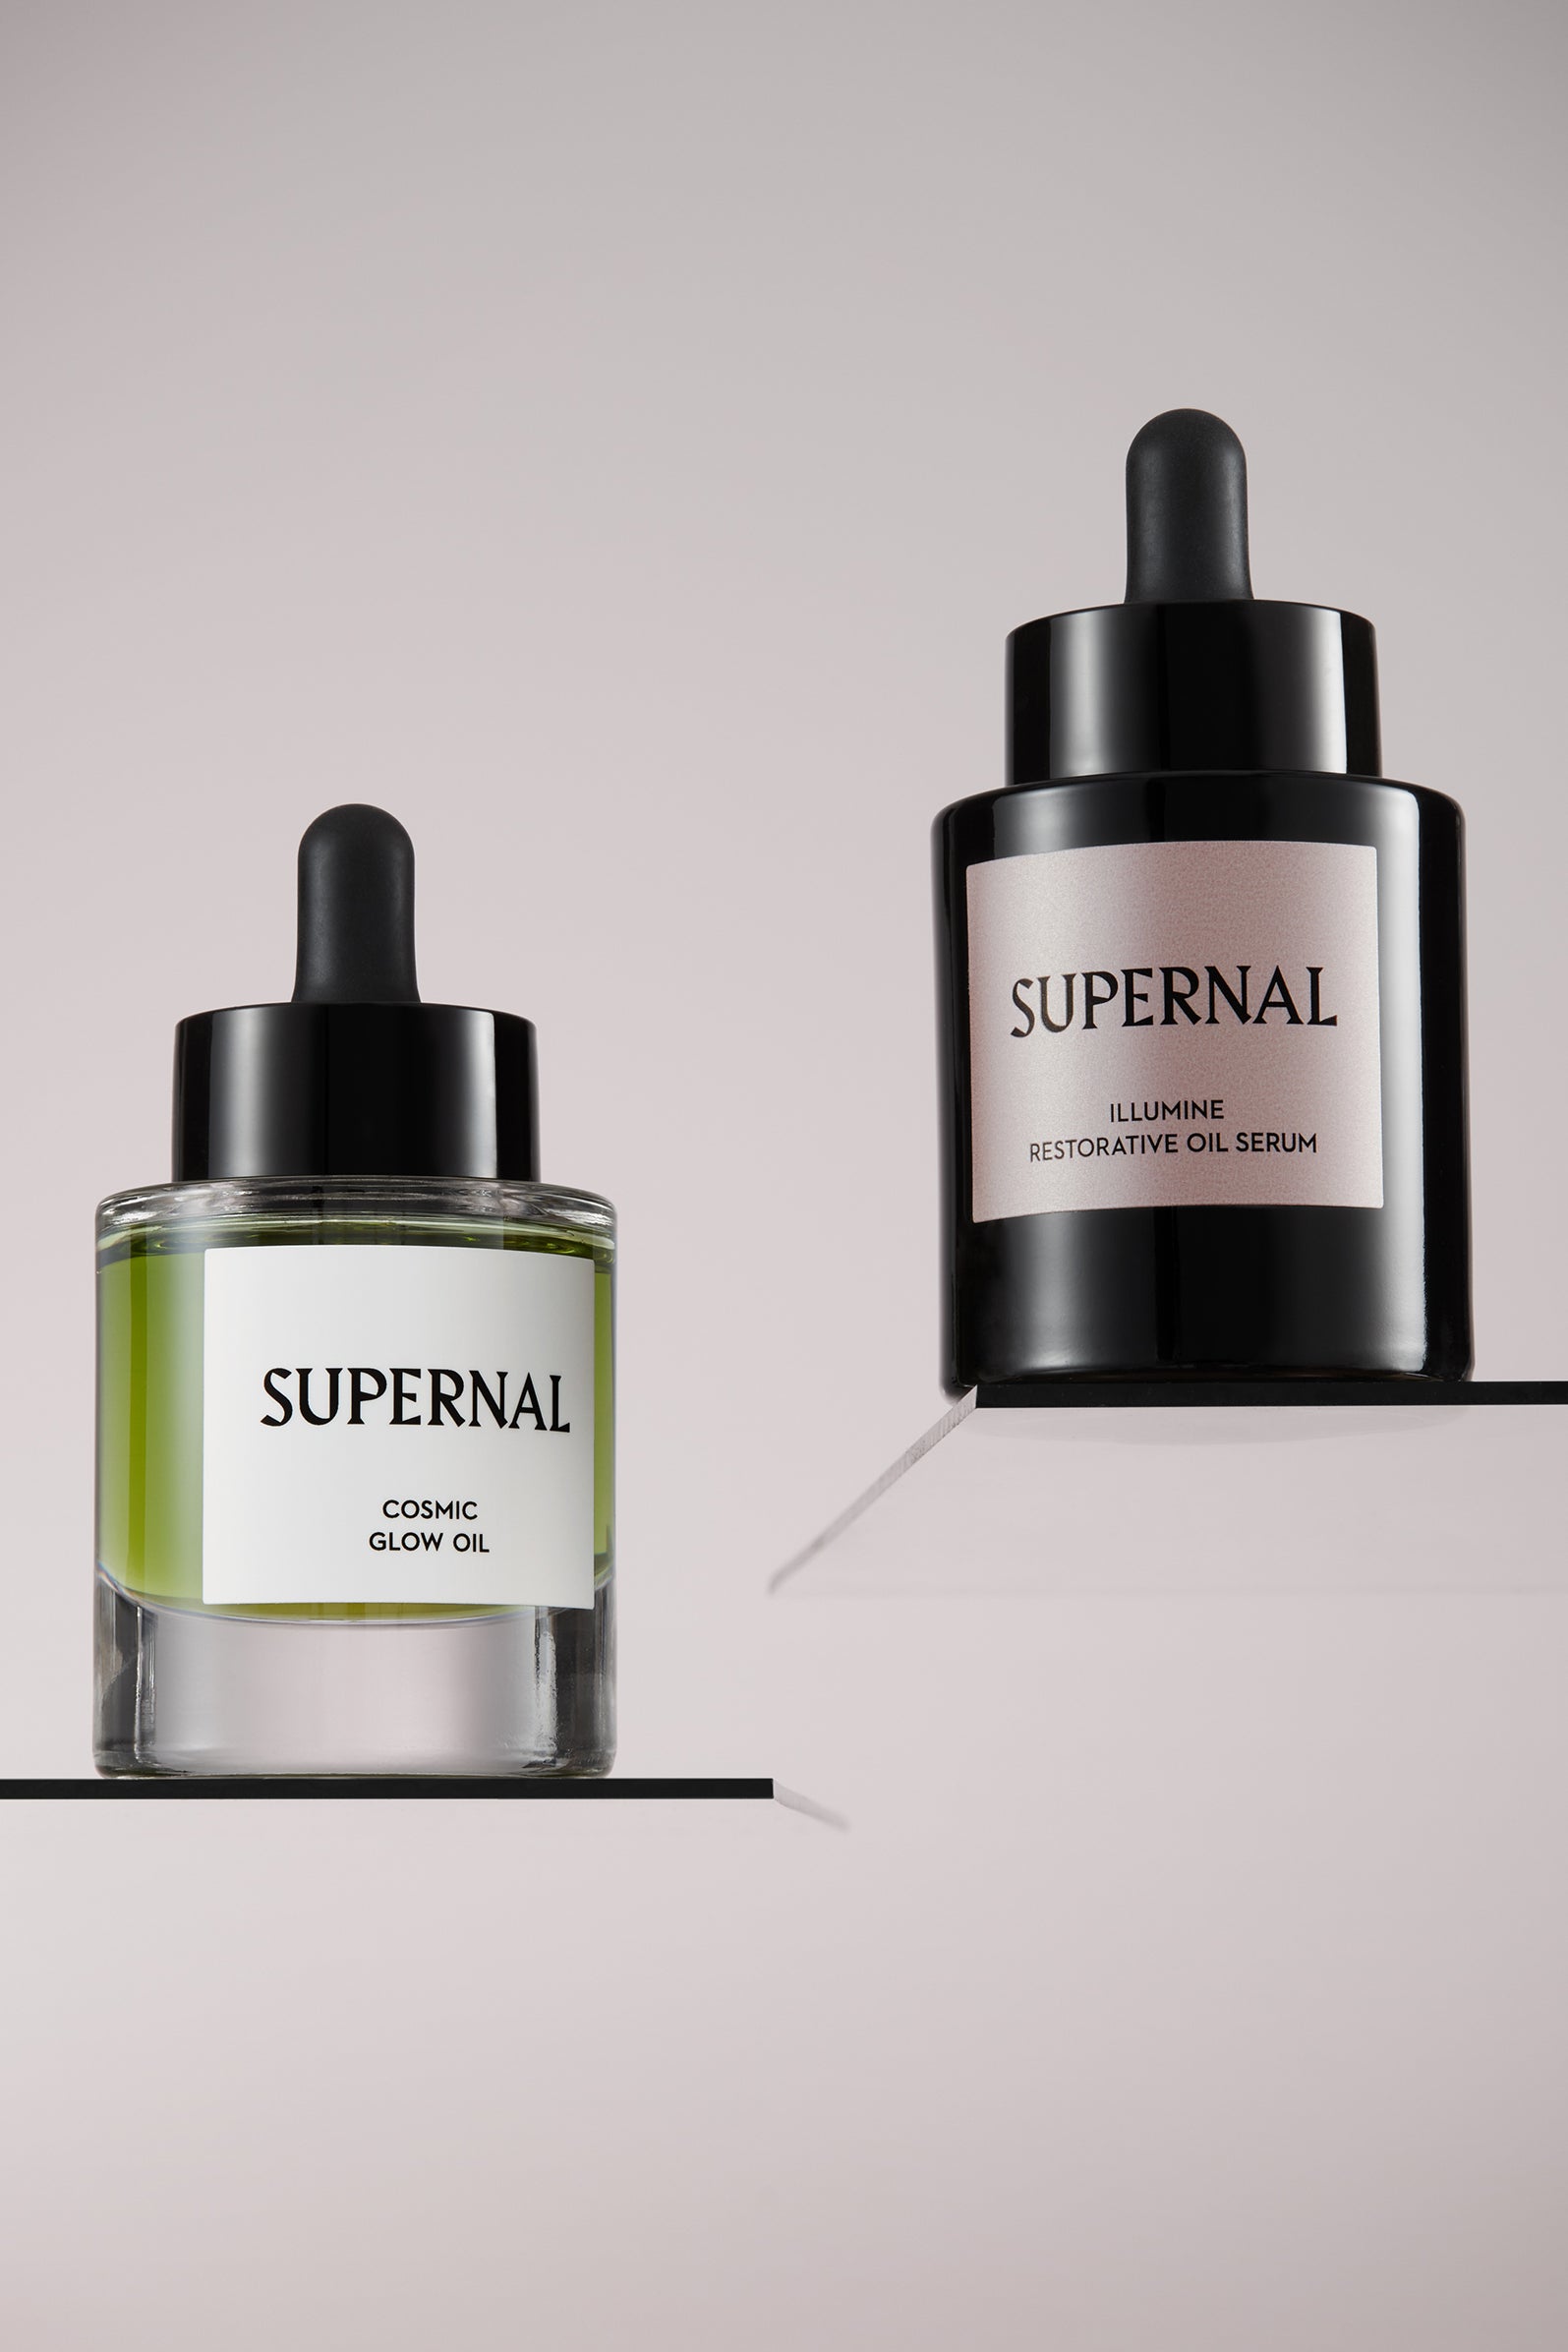 Clear skincare bottle with green oil name Supernal Cosmic Glow Oil and black opaque skincare bottle named Illumine Restorative Oil Serum both on individual glass shelves on grey background.